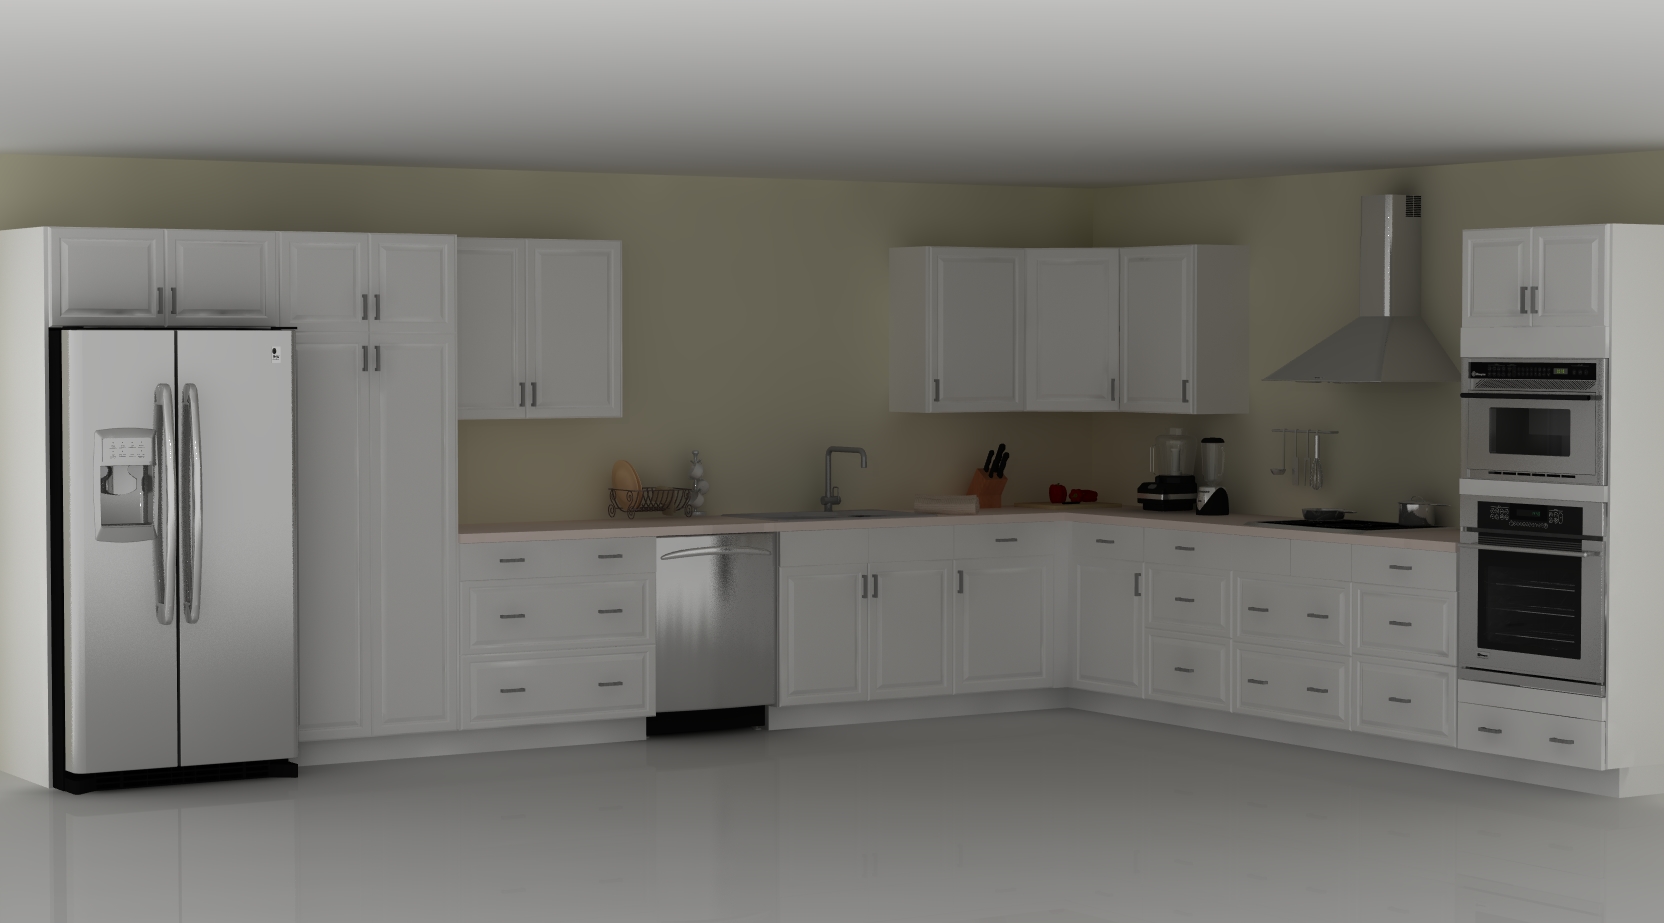 Pros and cons of L shaped kitchen ... pros and cons of an l-shaped ikea kitchen: an ... PRQEQVO